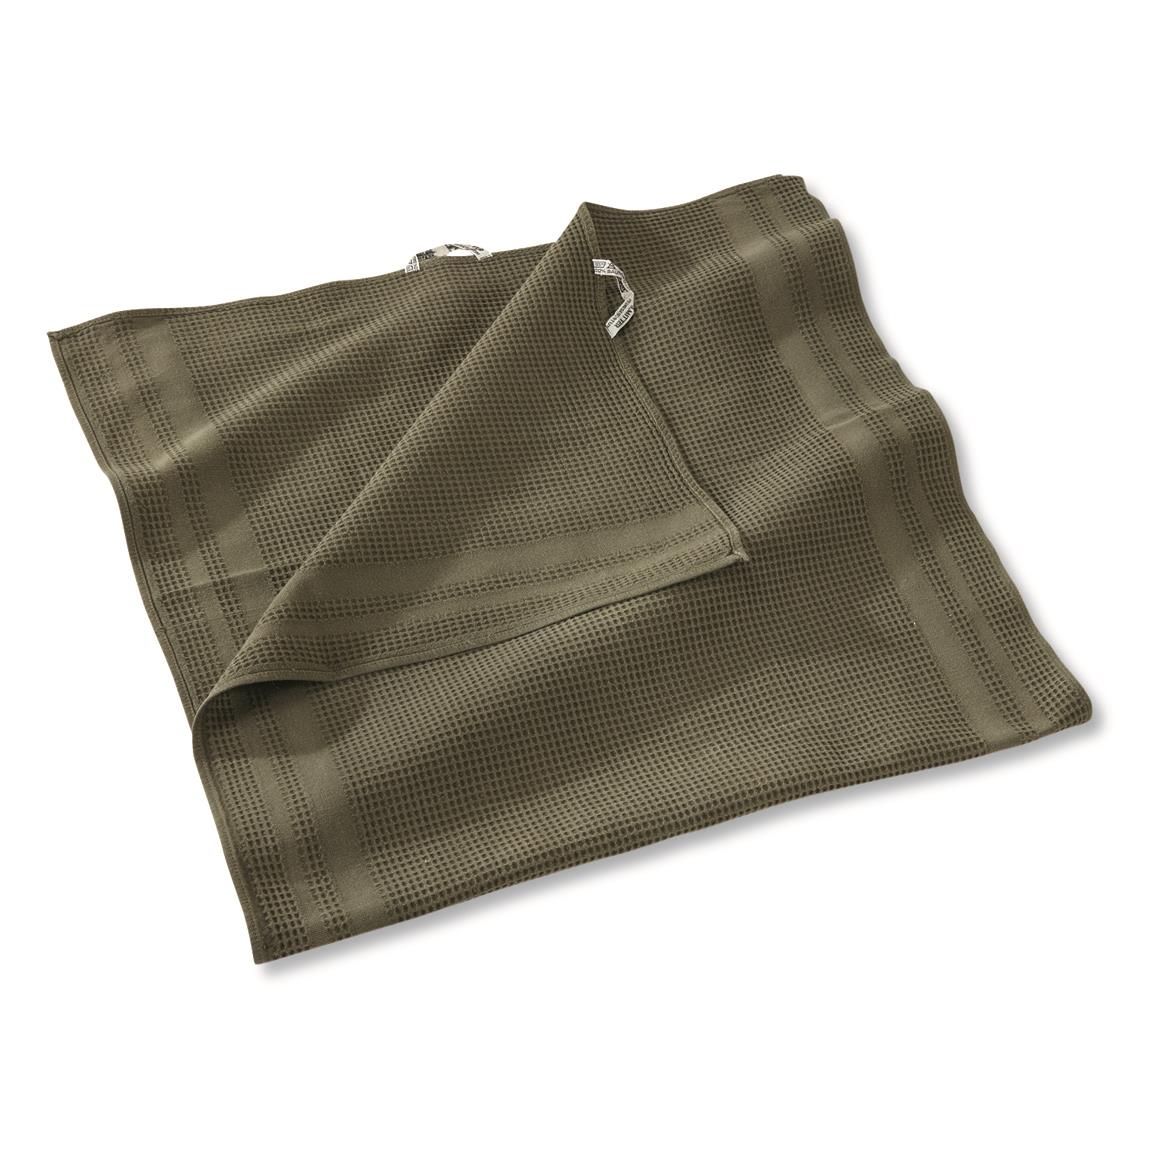 Austrian Military Surplus 20" x 40" Cotton Towels, 3 Pack, Like New, Olive Drab